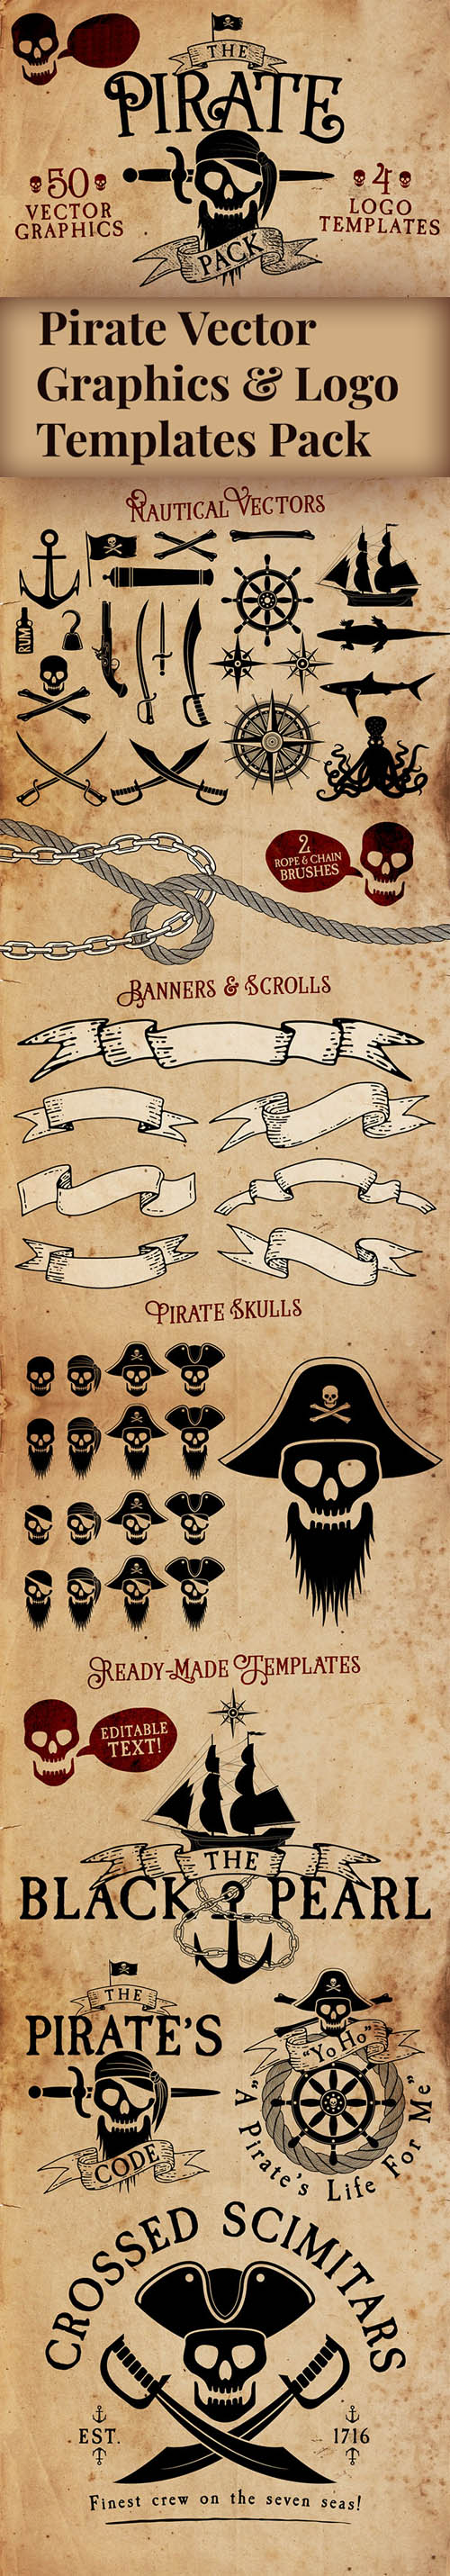 Pirate Vector Graphics & Logo Vector Templates Pack [Ai/EPS]